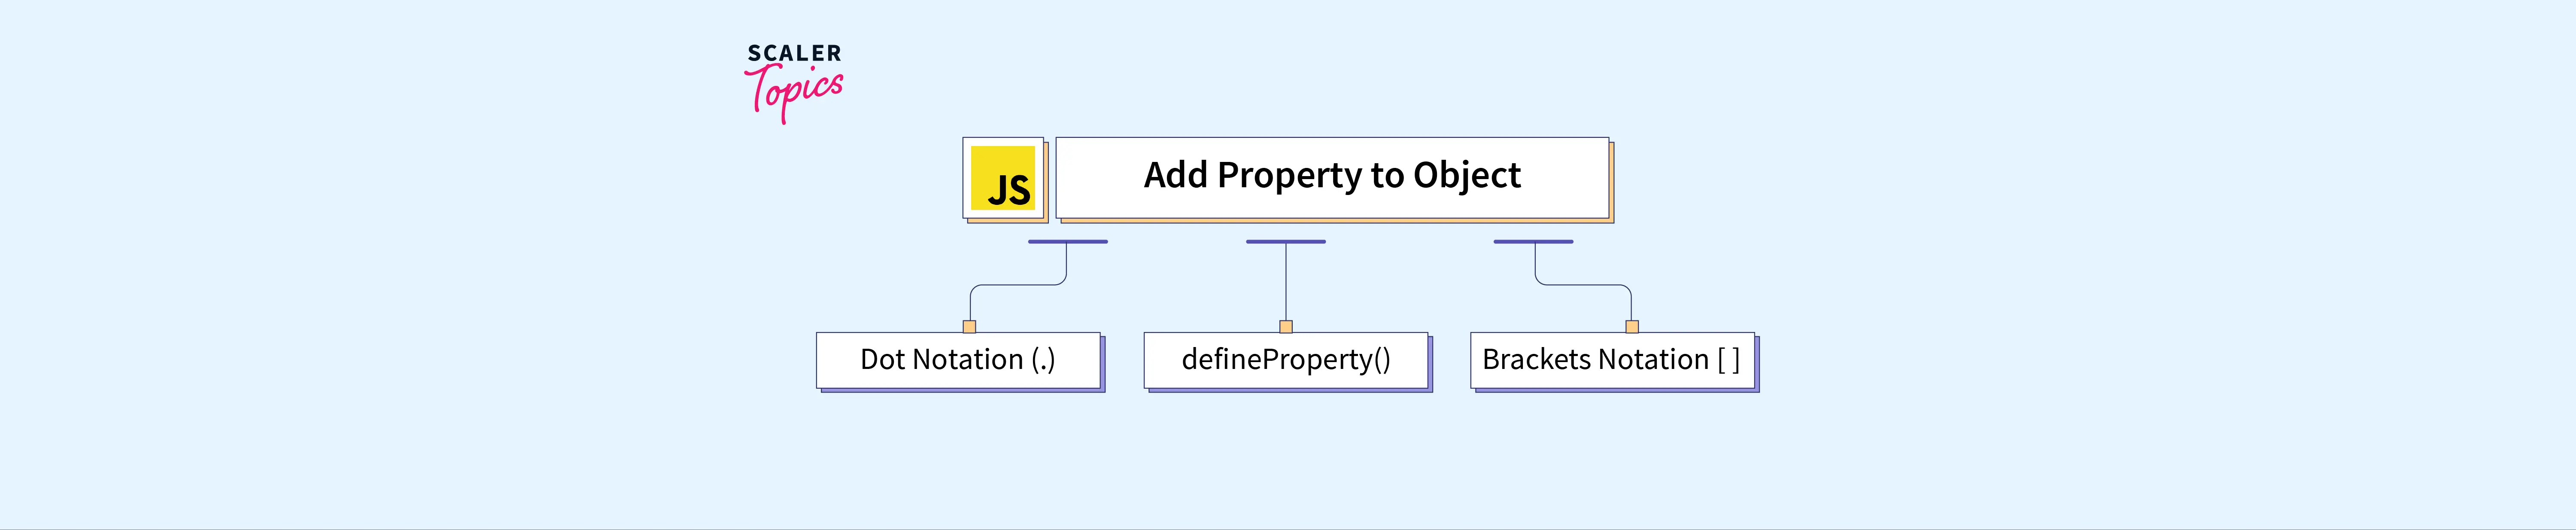 assign property to object